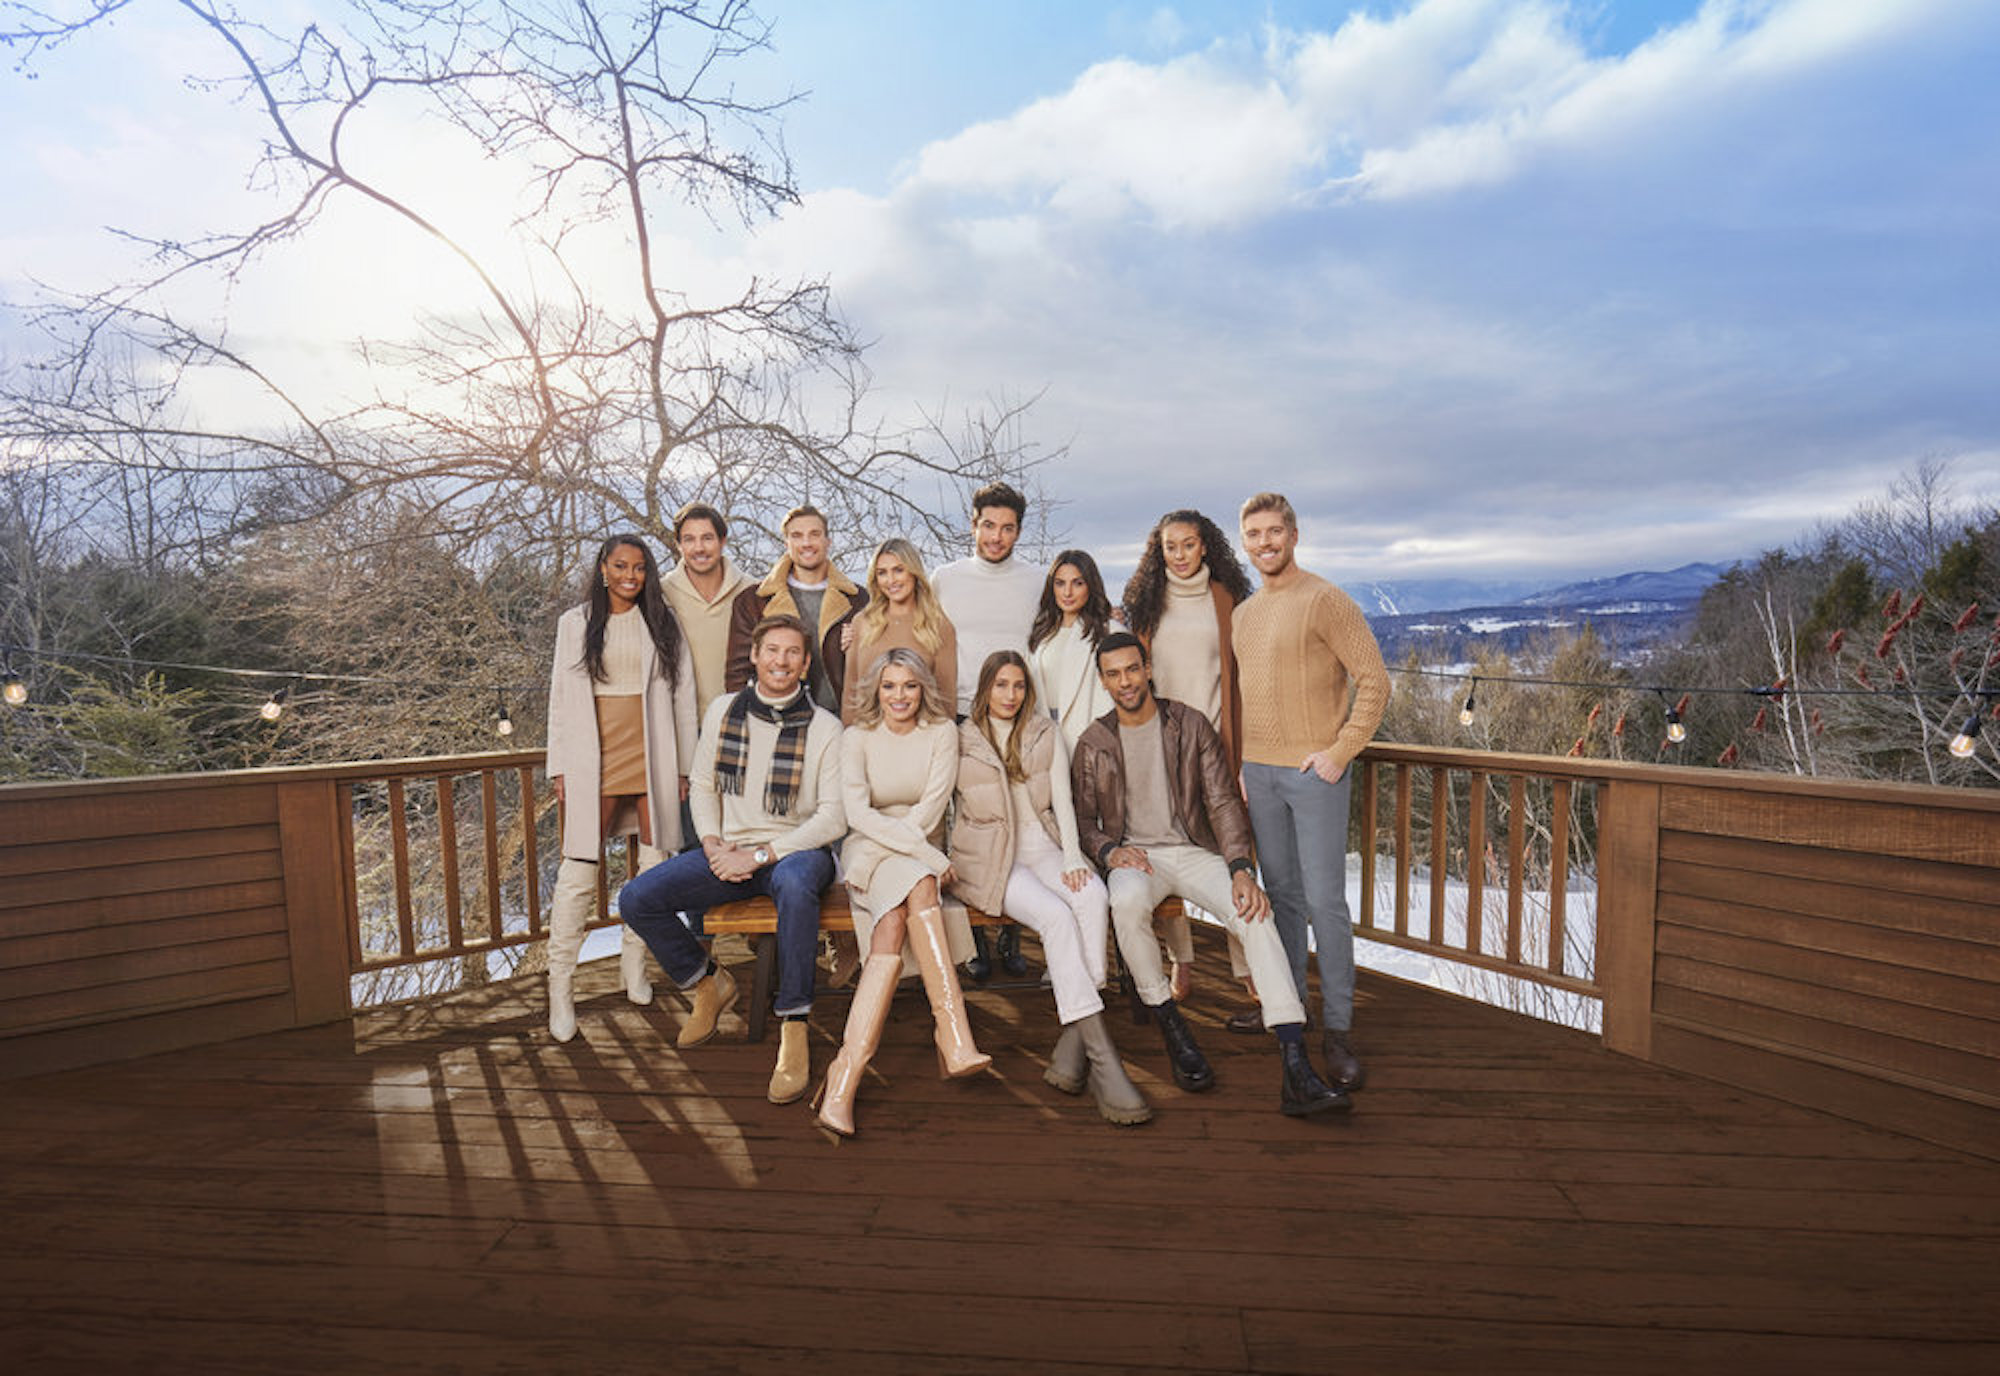 The cast of 'Winter House' pose on a balcony in front of snowy landscape in a promotional photo for 'Winter House